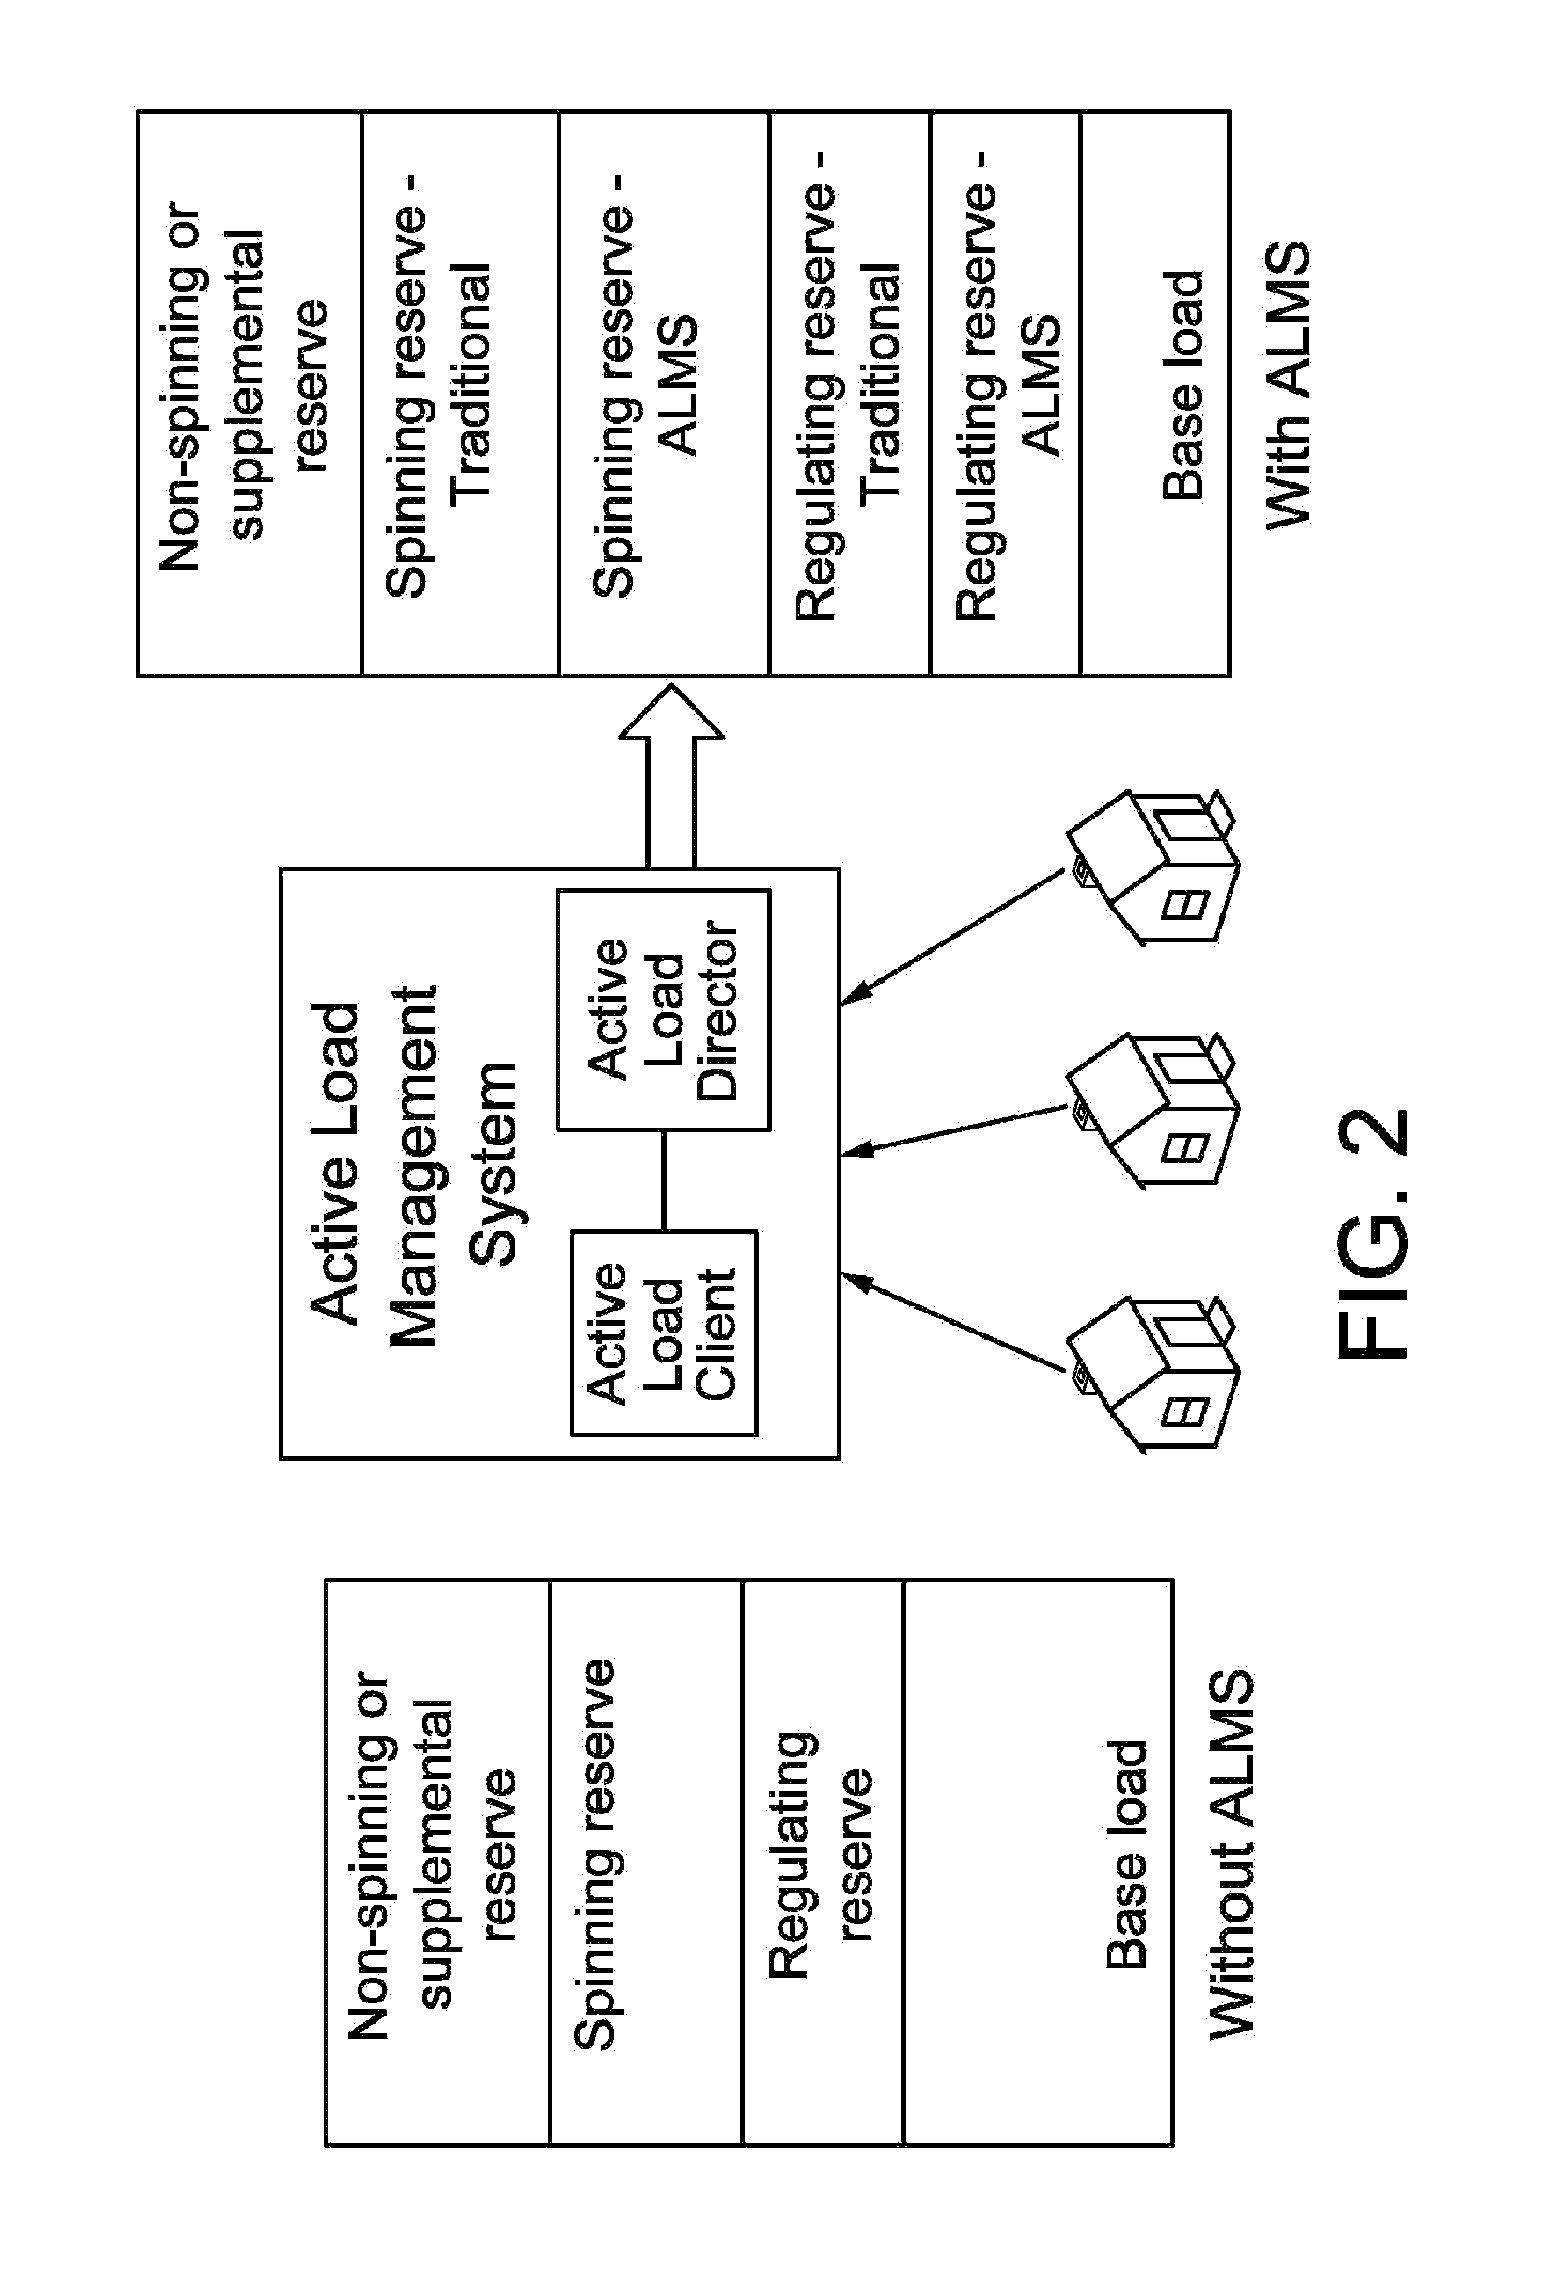 System and method for generating and providing dispatchable operating reserve energy capacity through use of active load management to compensate for an over-generation condition